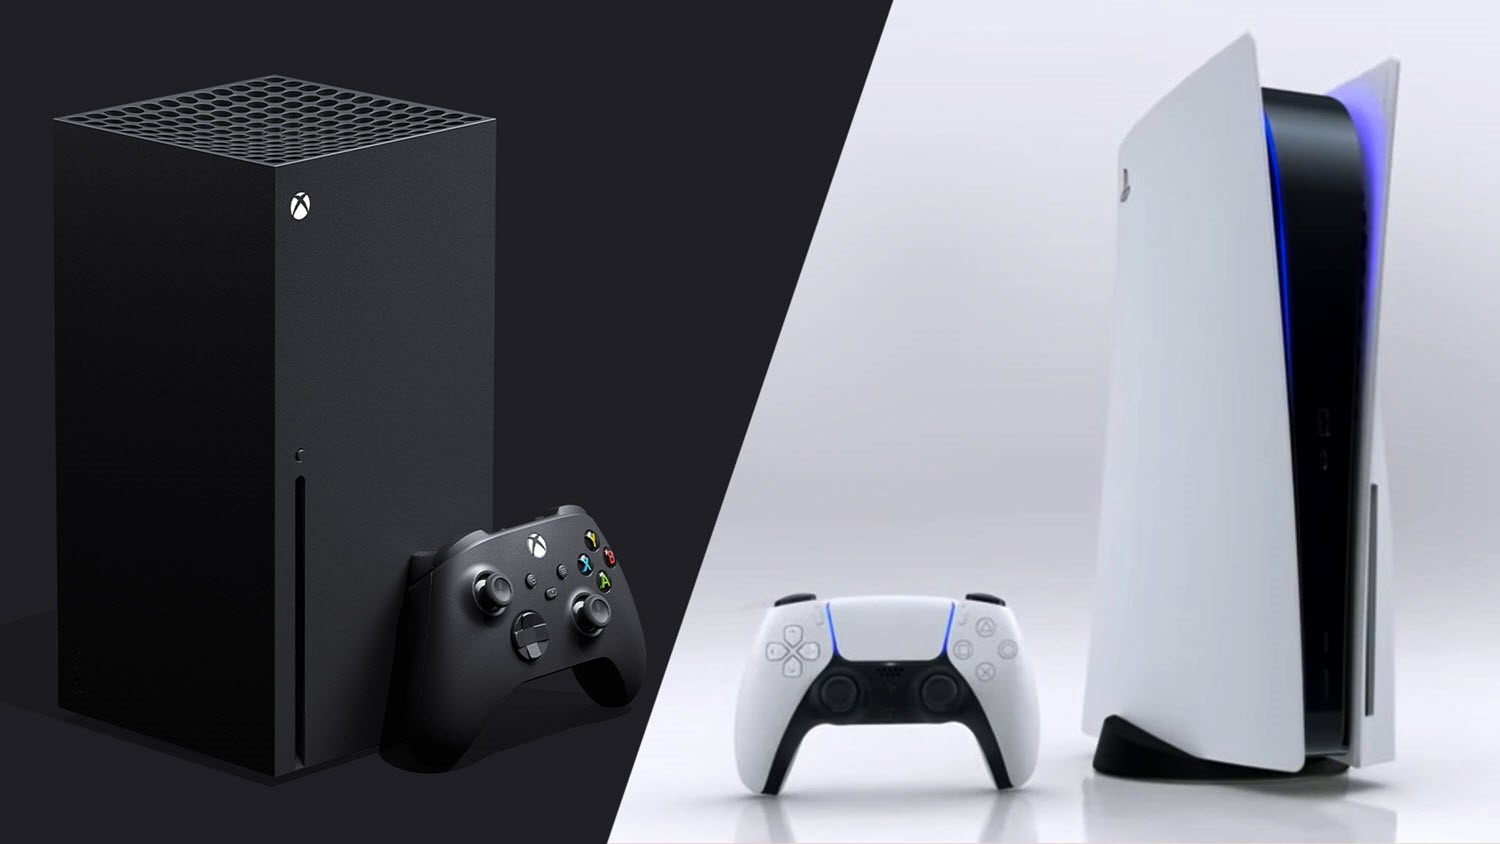 Which is the strongest "PlayStation 5" or "Xbox Series X" and what is the difference between them? 1